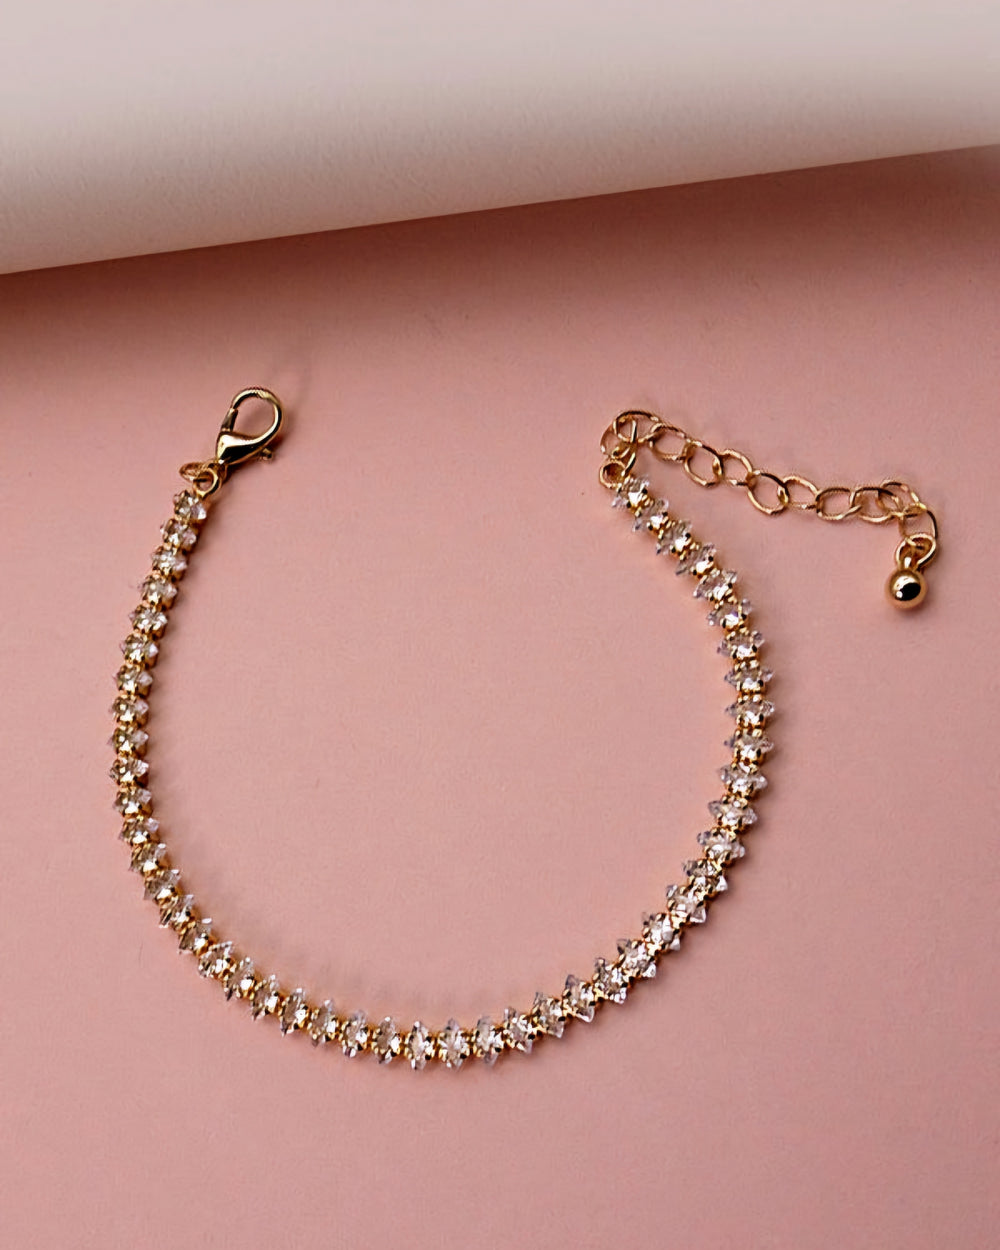 The Grand Marquise Tennis Bracelet